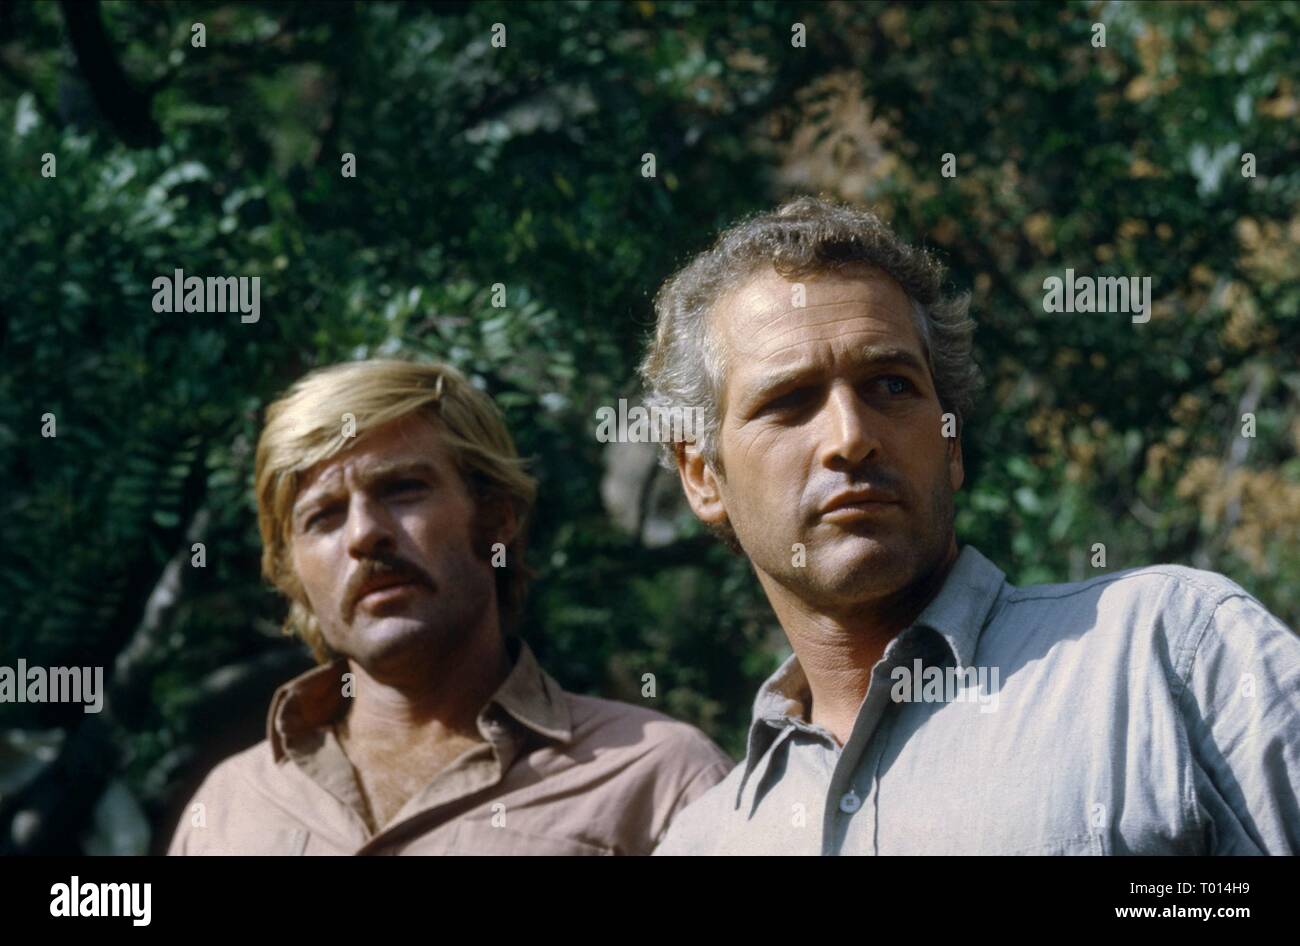 ROBERT REDFORD, PAUL NEWMAN, BUTCH CASSIDY AND THE SUNDANCE KID, 1969 Stock Photo